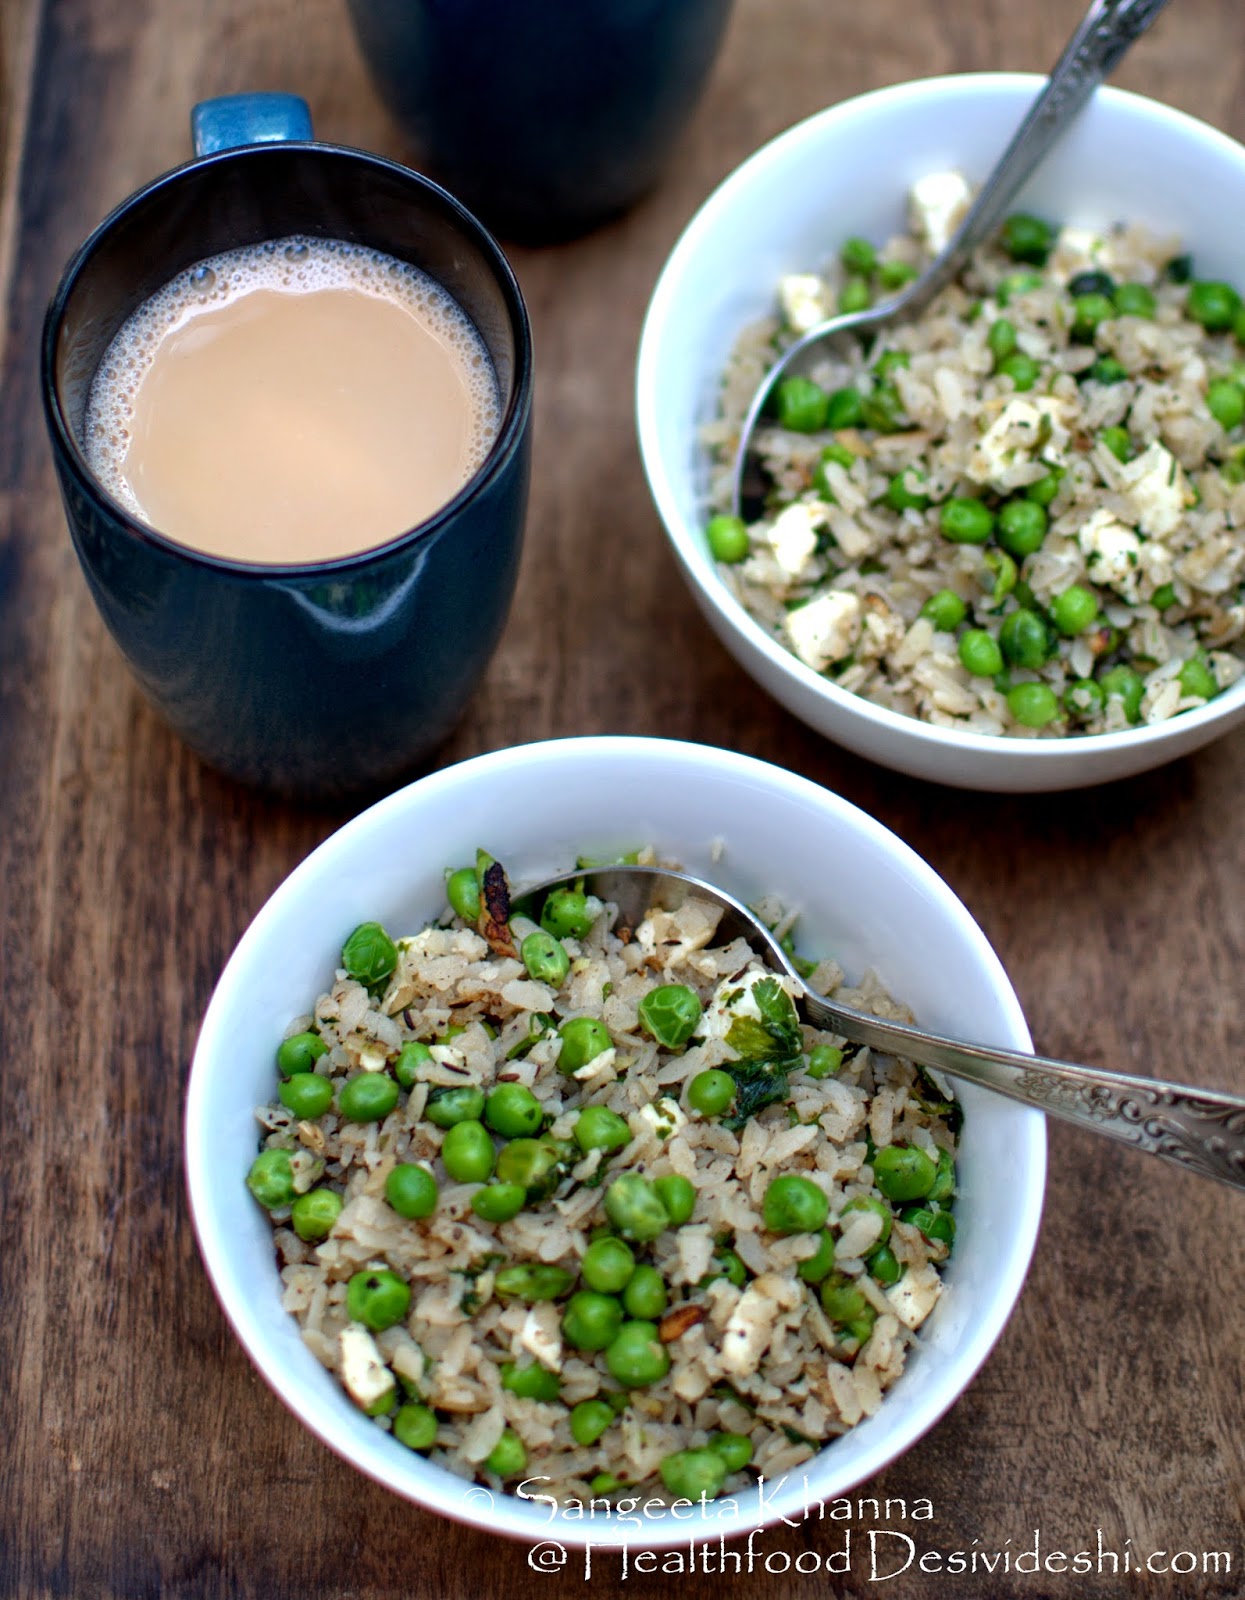 101 gluten free breakfasts : poha (flattened rice) is for everyone | 4 recipes of a probiotic breakfast 